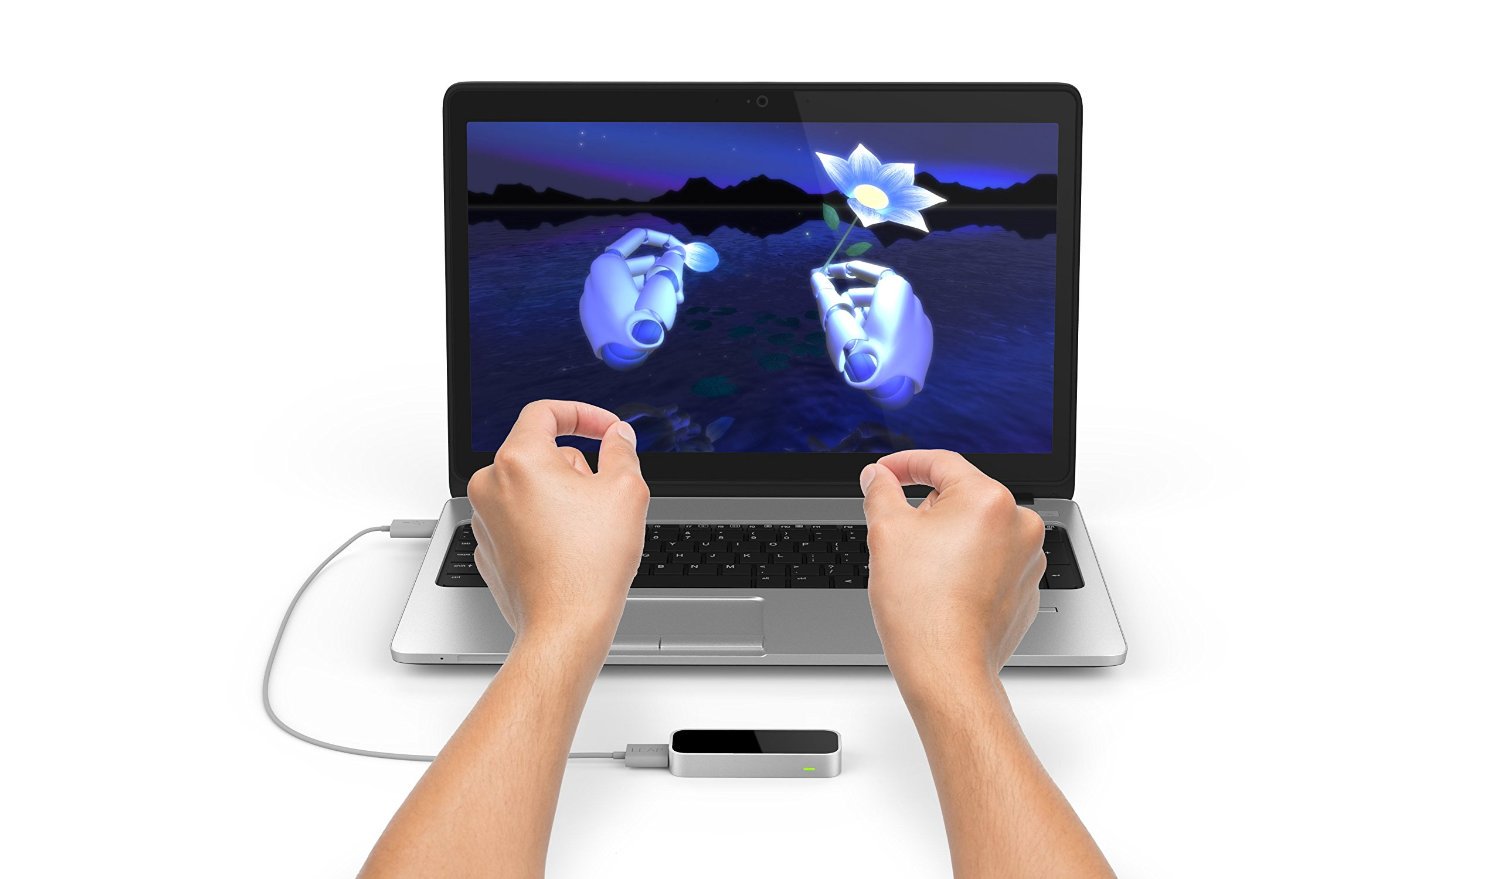 Leap Motion has announced a new platform for augmented reality tracking of hand movements